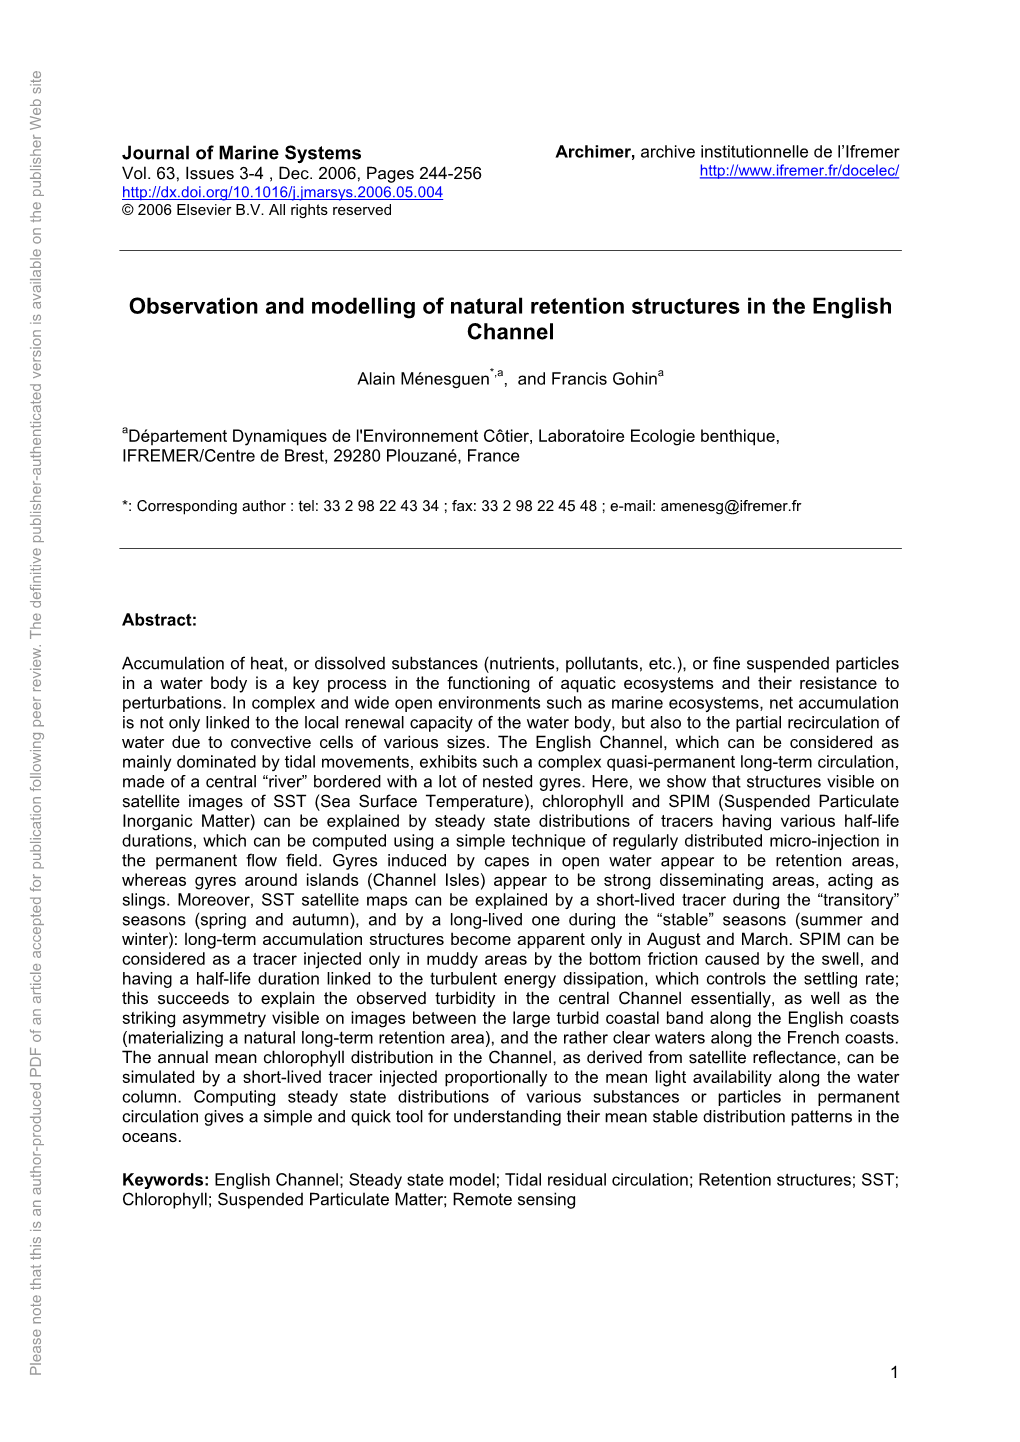 Observation and Modelling of Natural Retention Structures In